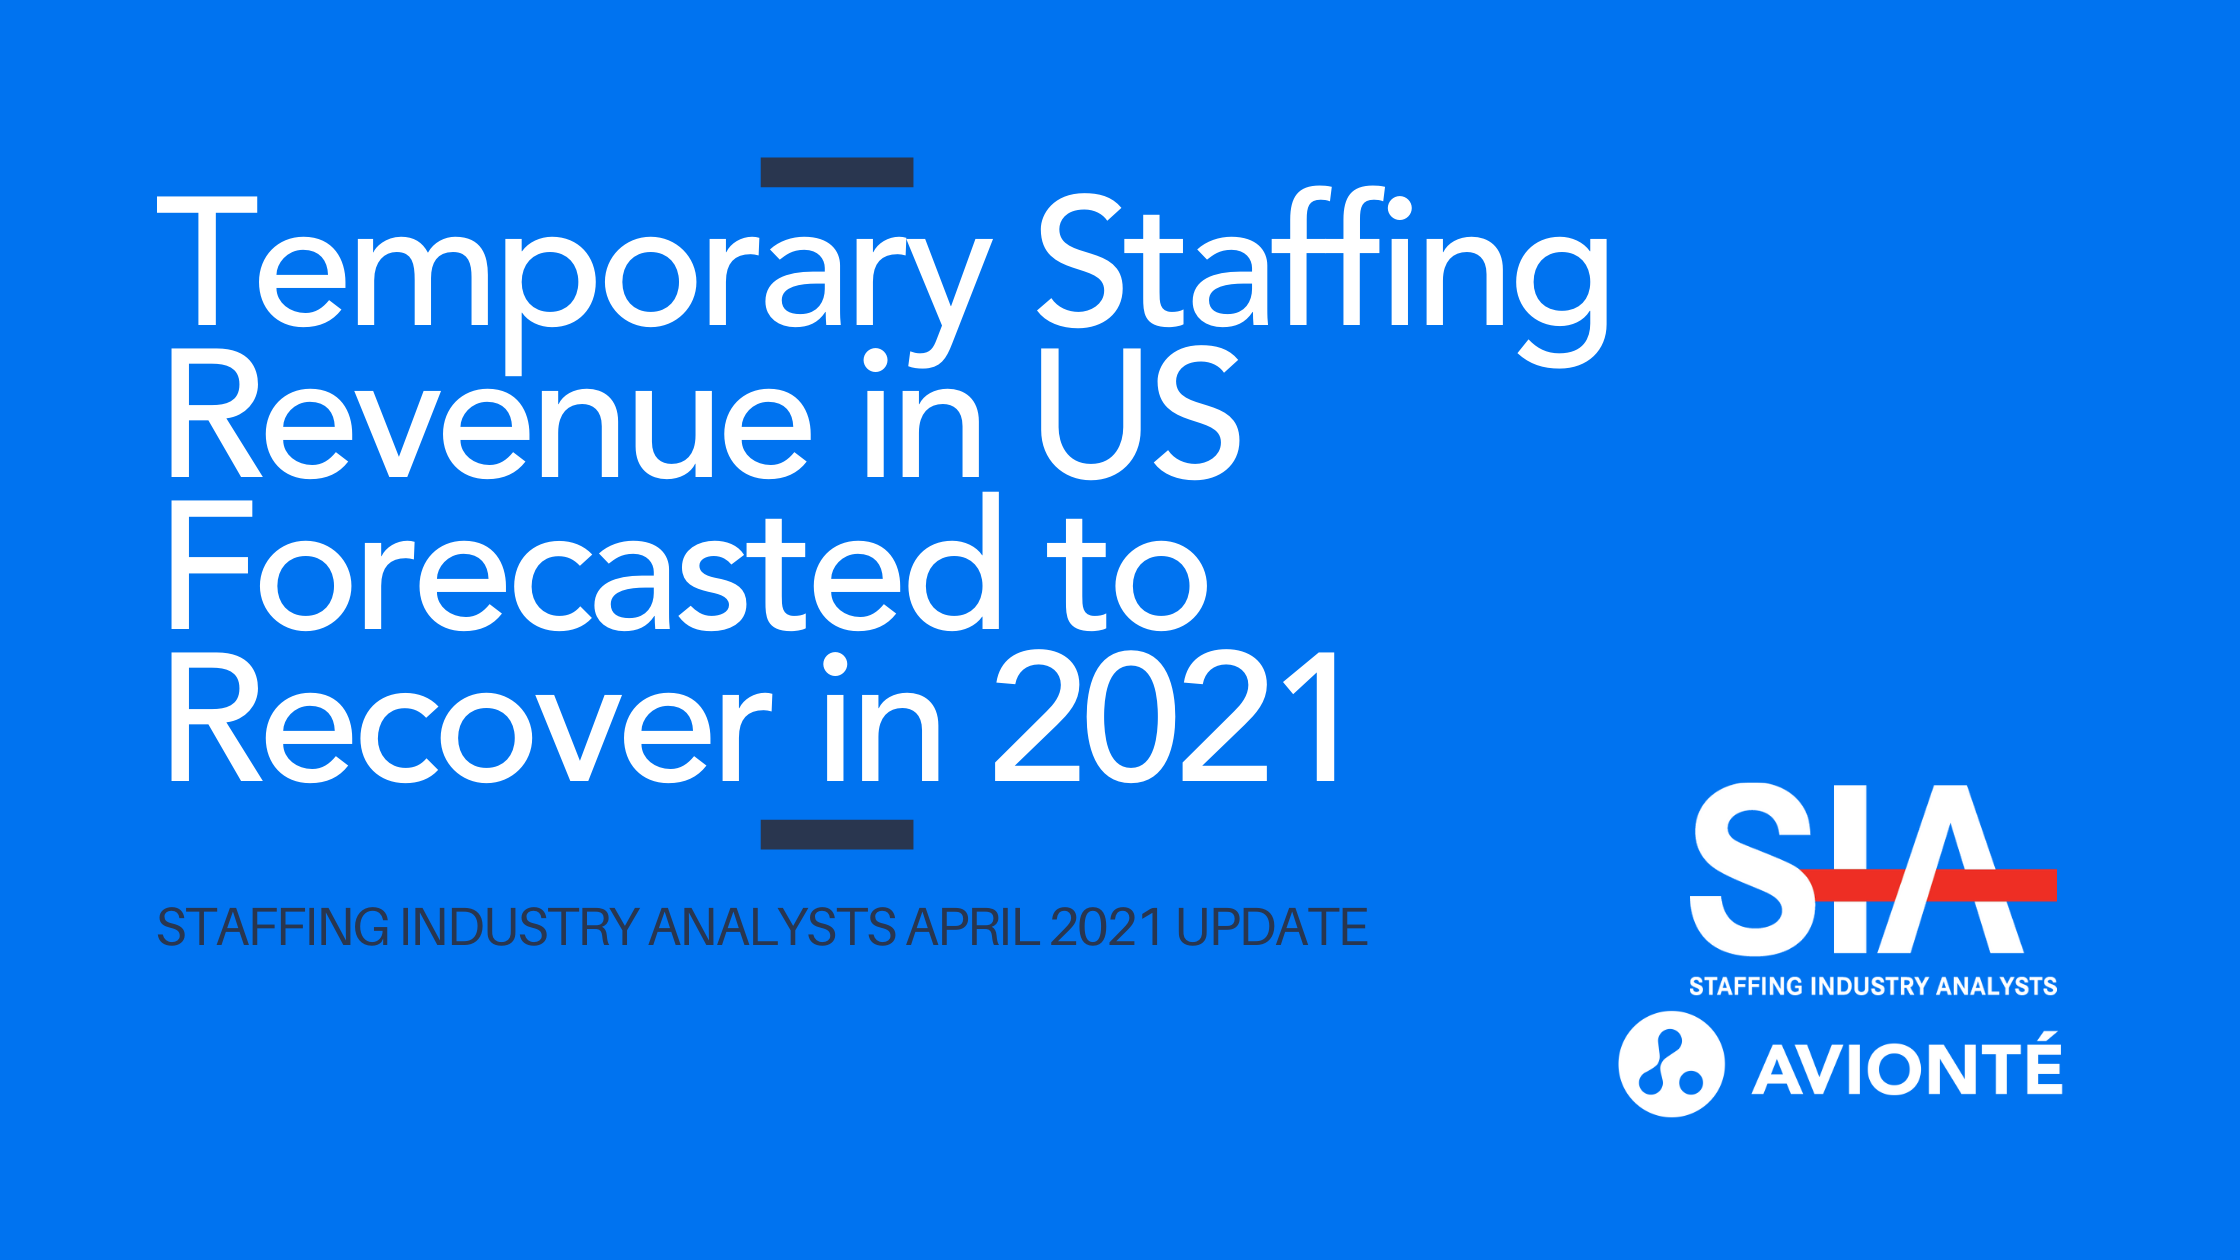 Staffing firm revenue expected to grow in 2021